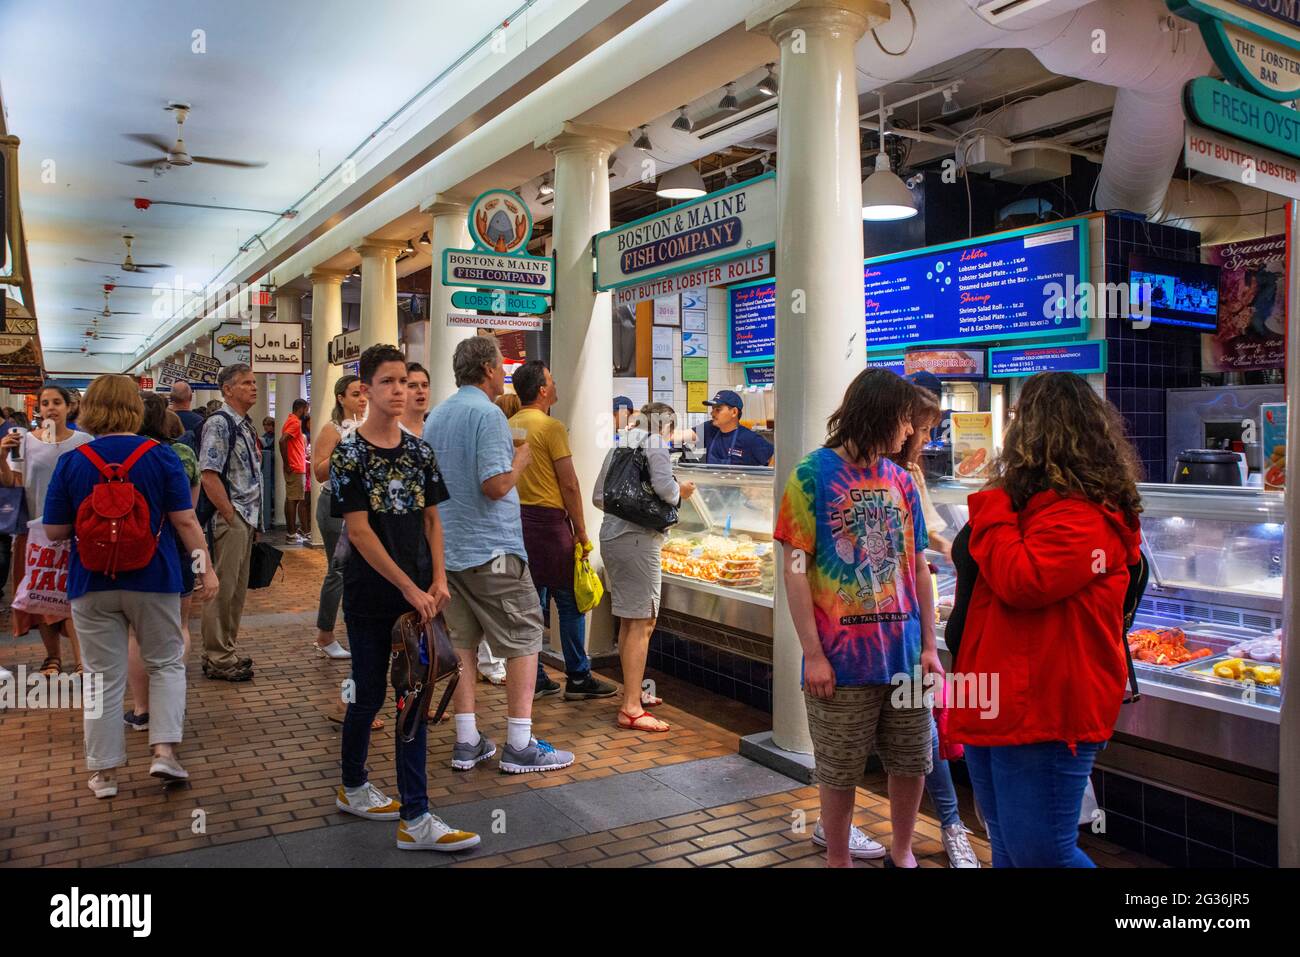 Restaurants stalls inside Quincy Market Freedom Trail Boston Massachusetts. Built in early 1800s as one of the largest market complexes in first half Stock Photo